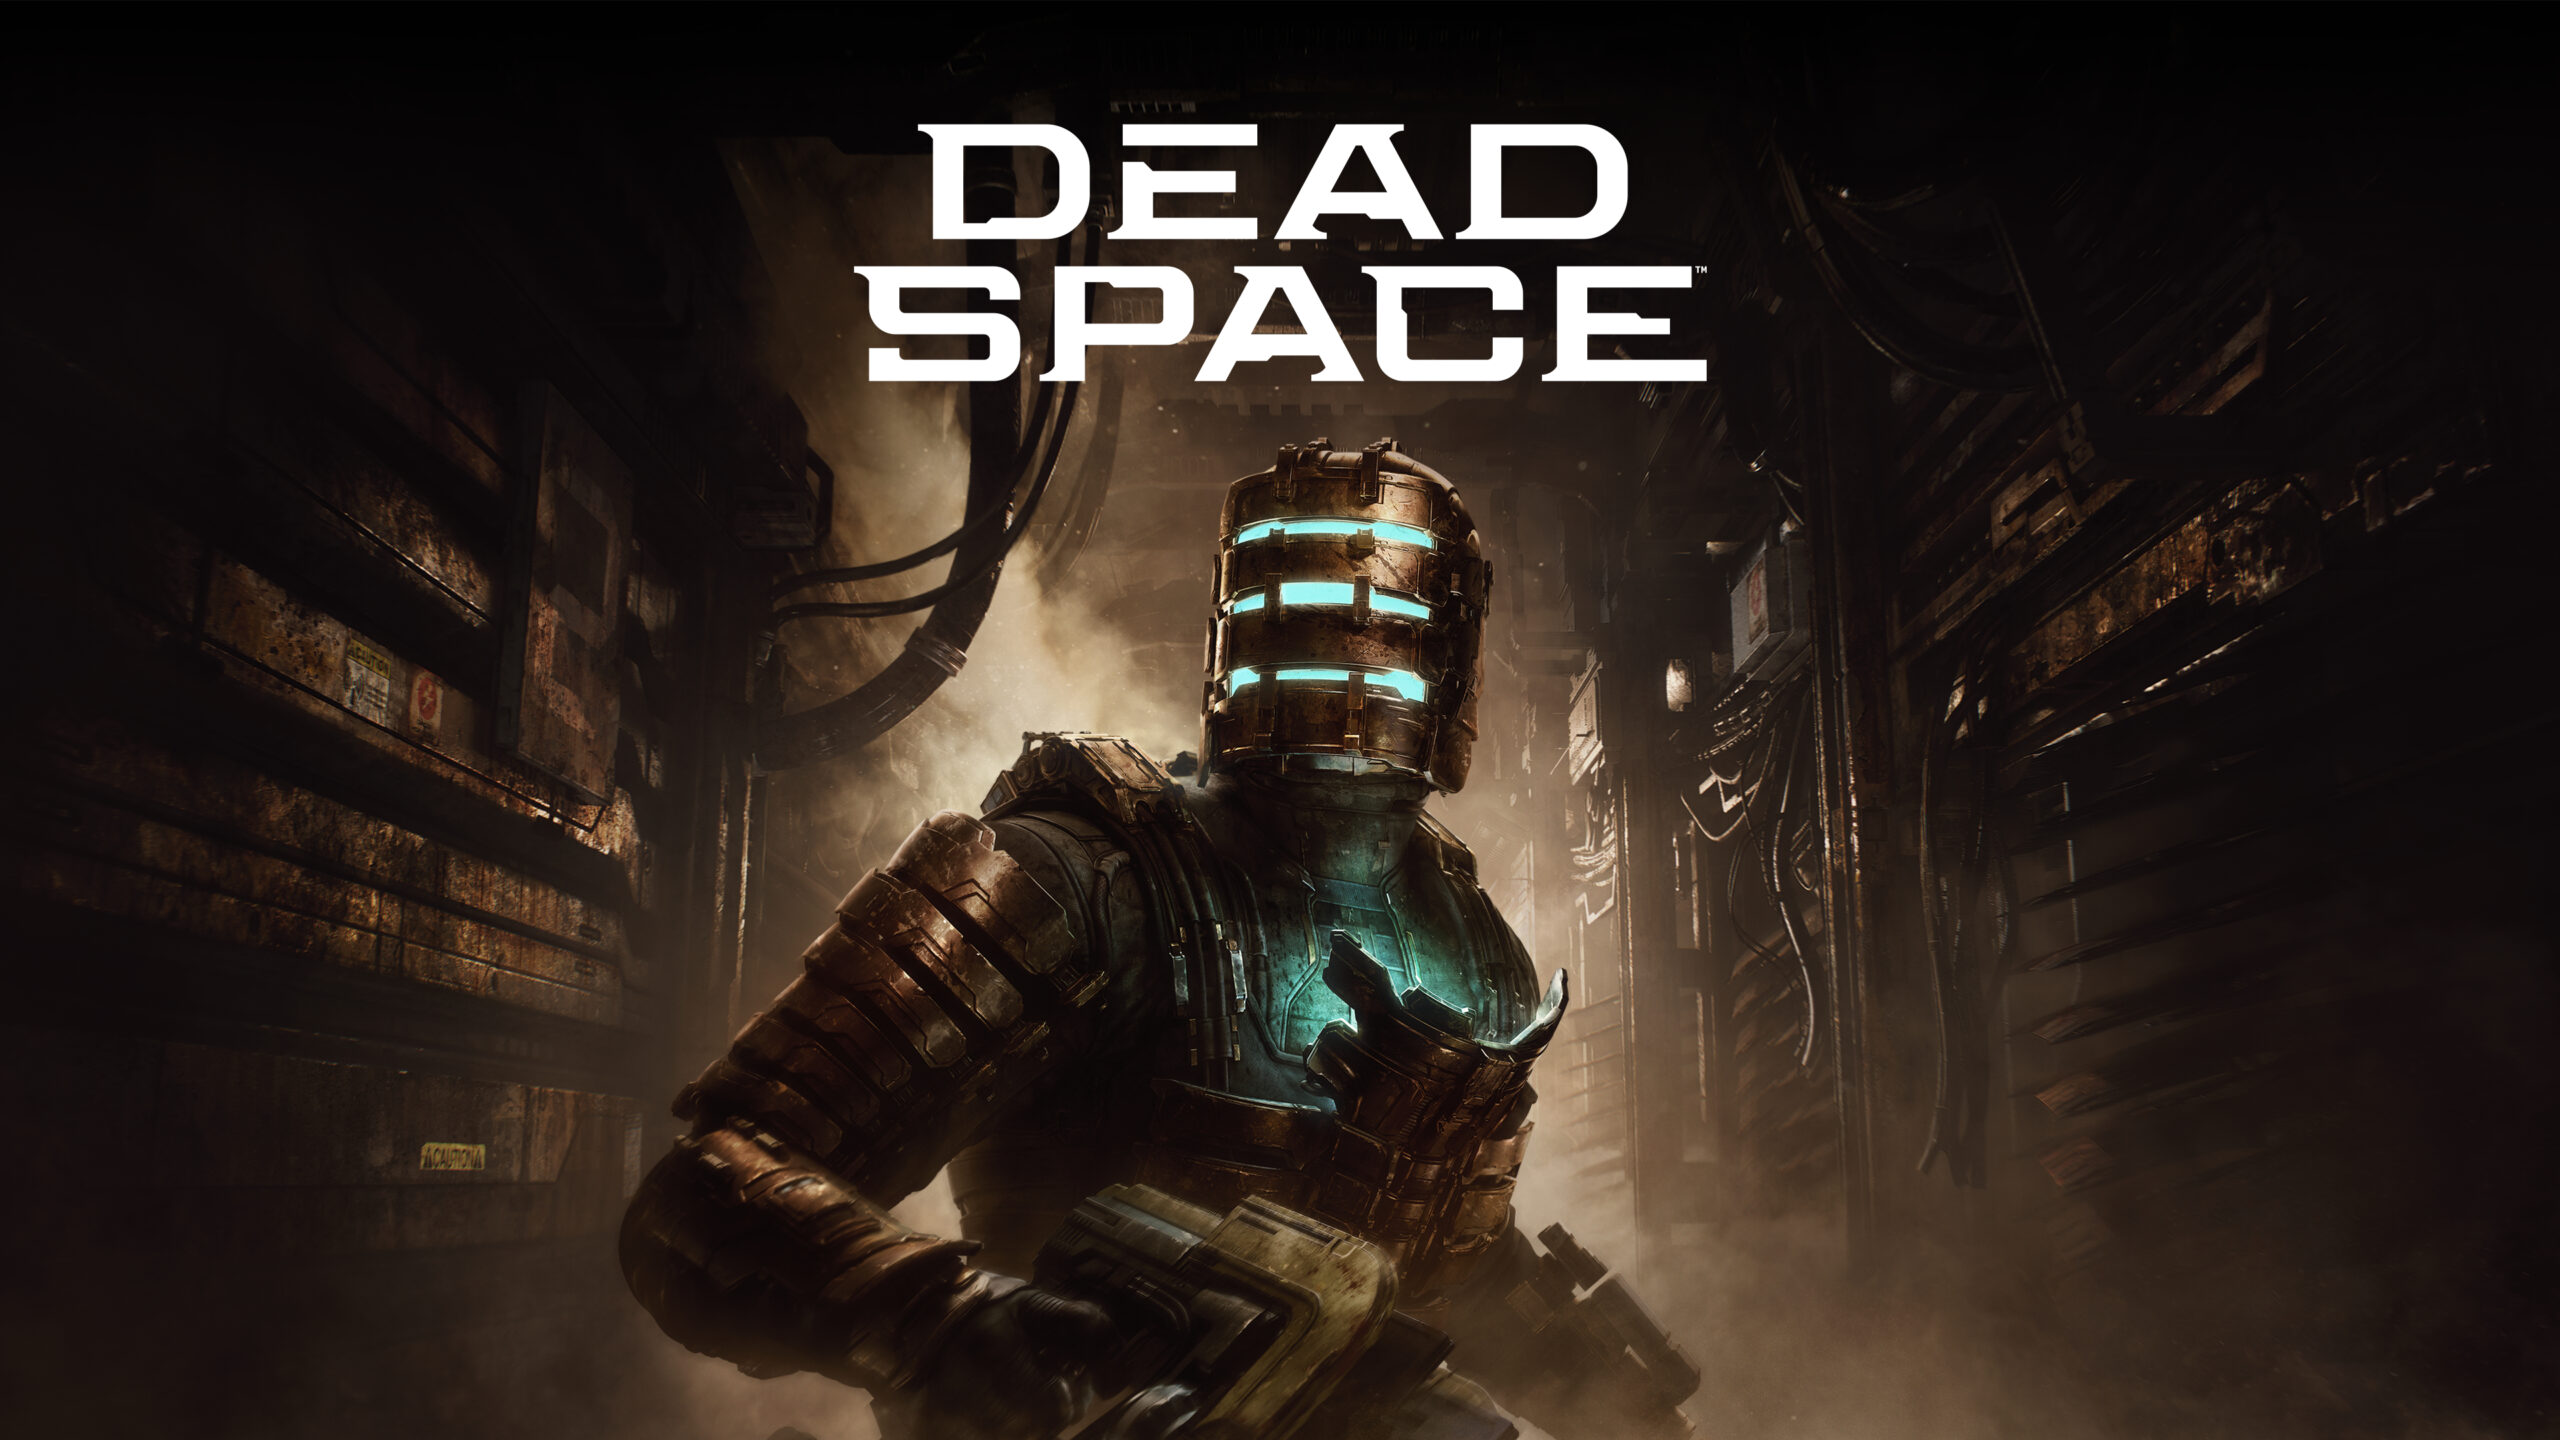 Dead Space, Remake of the Sci-Fi Survival Horror Classic, Now Available on PlayStation 5, Xbox Series X|S and PC